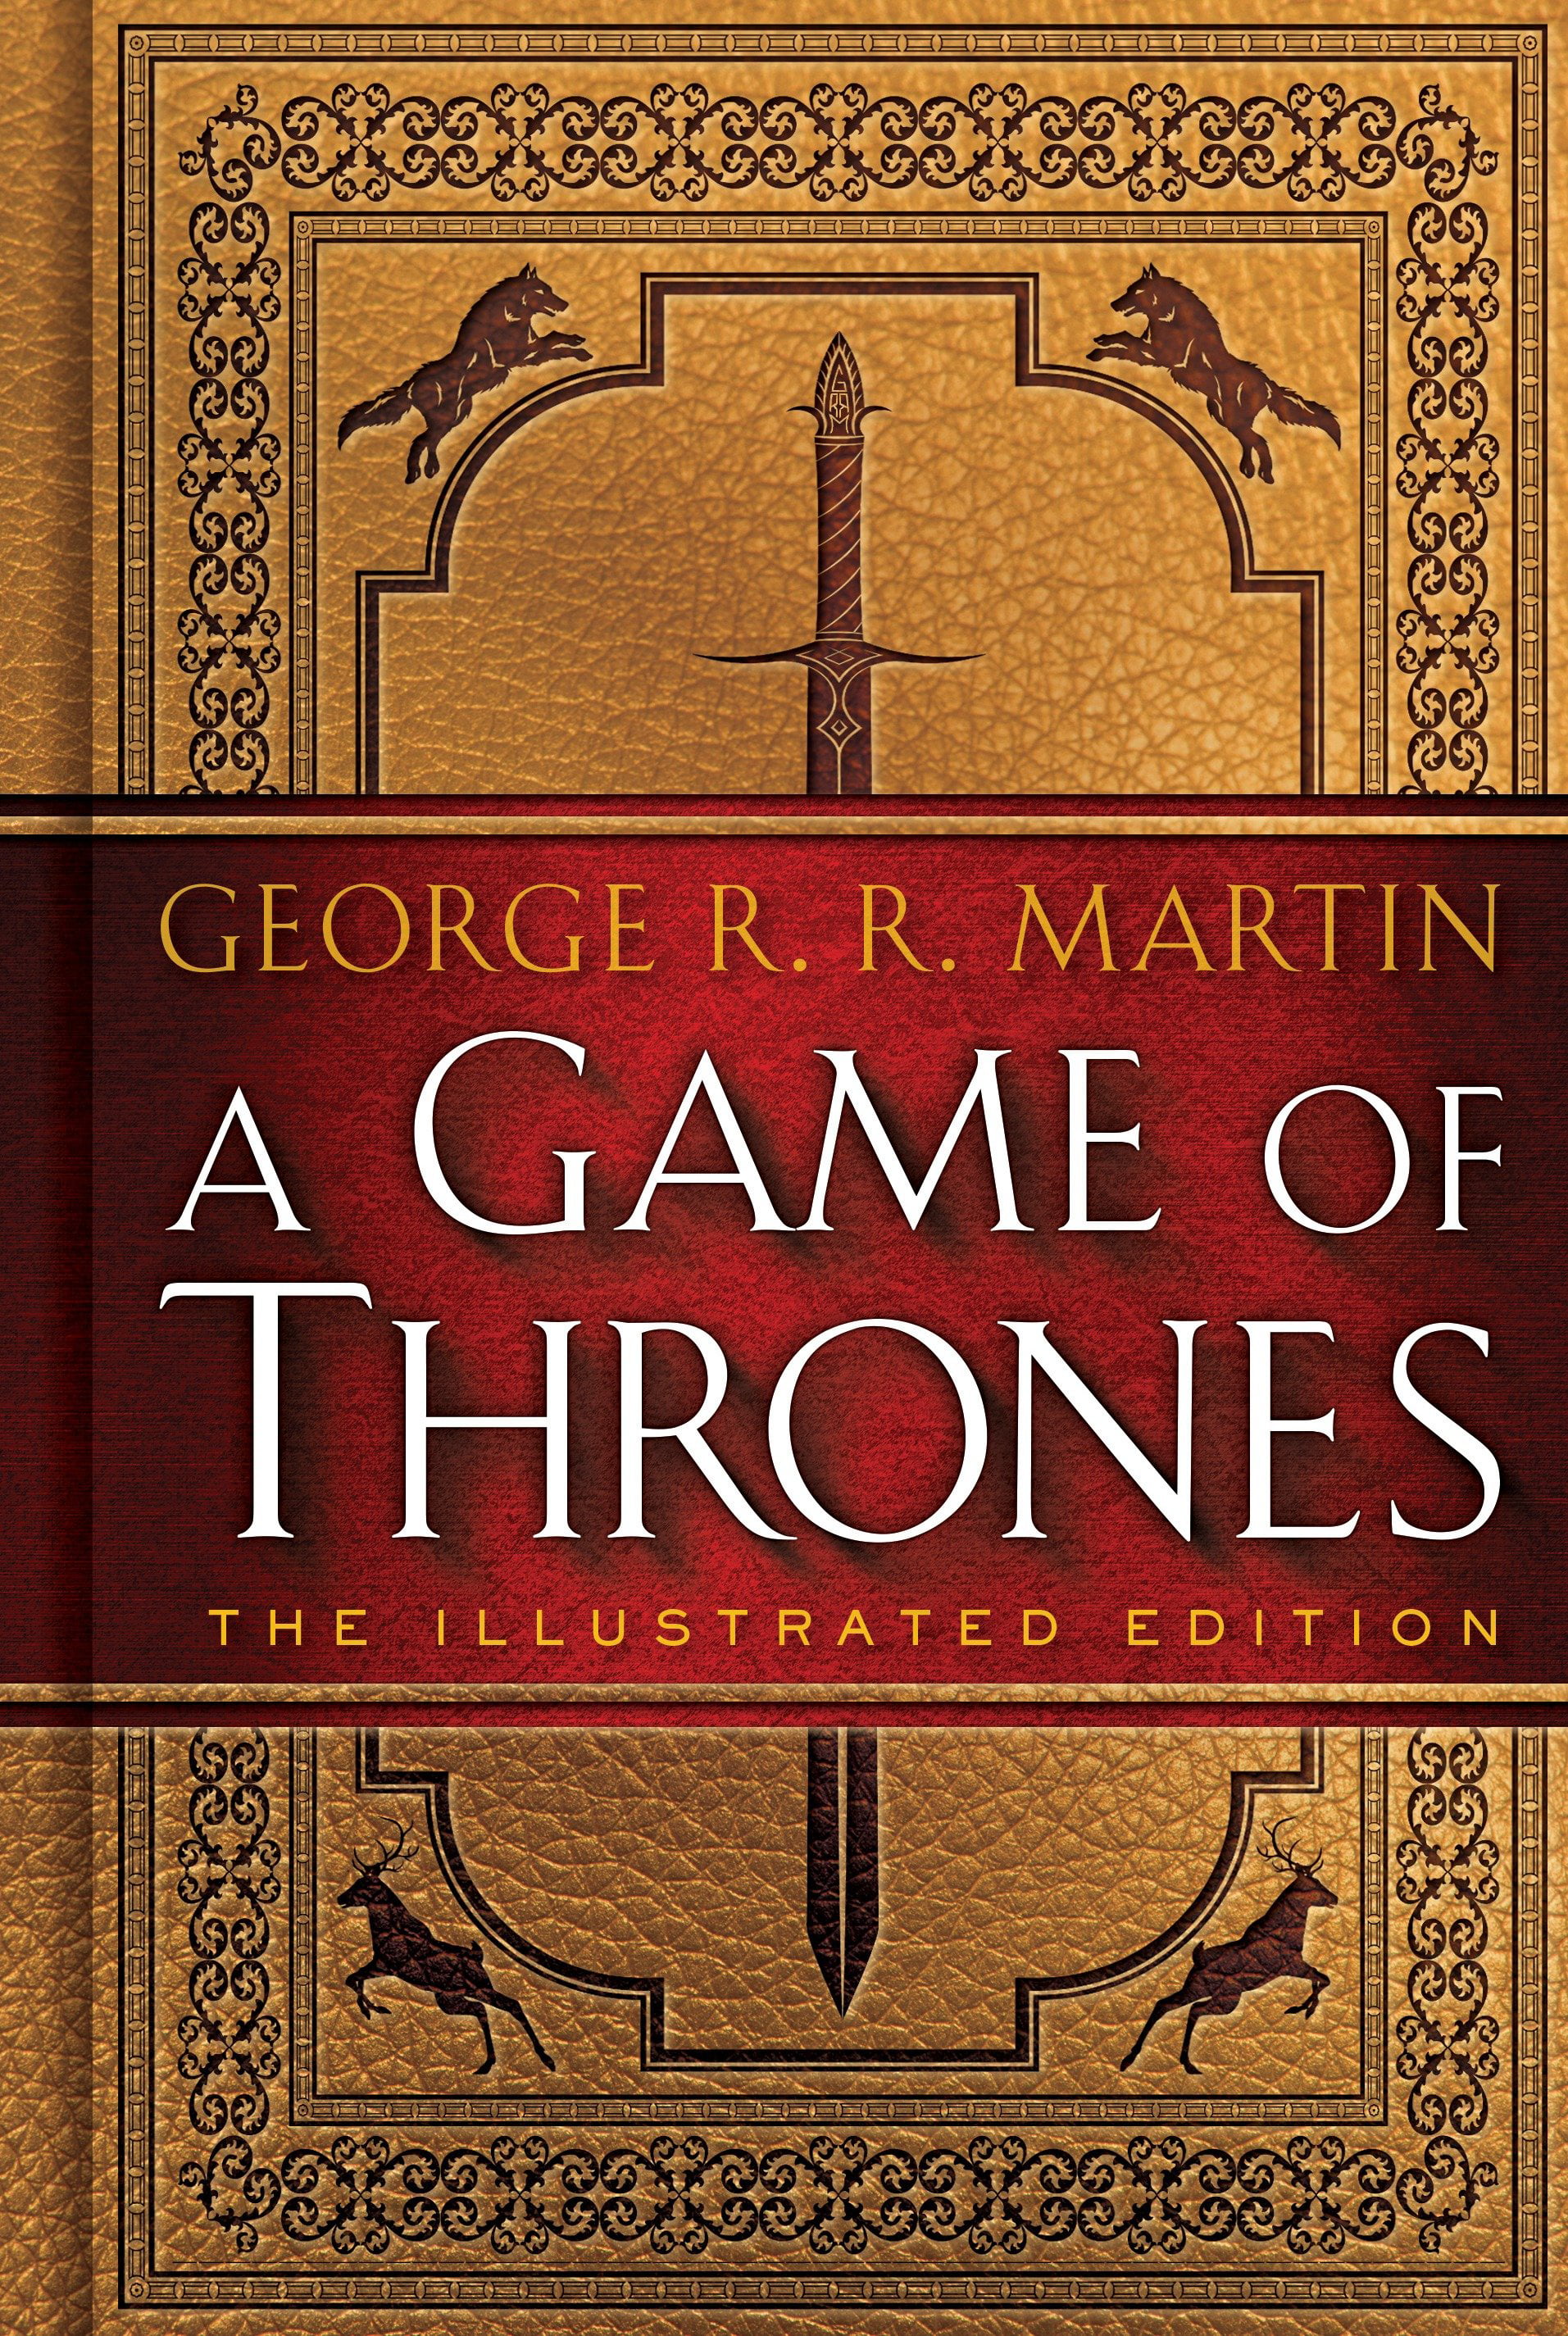 a song of ice and fire book series